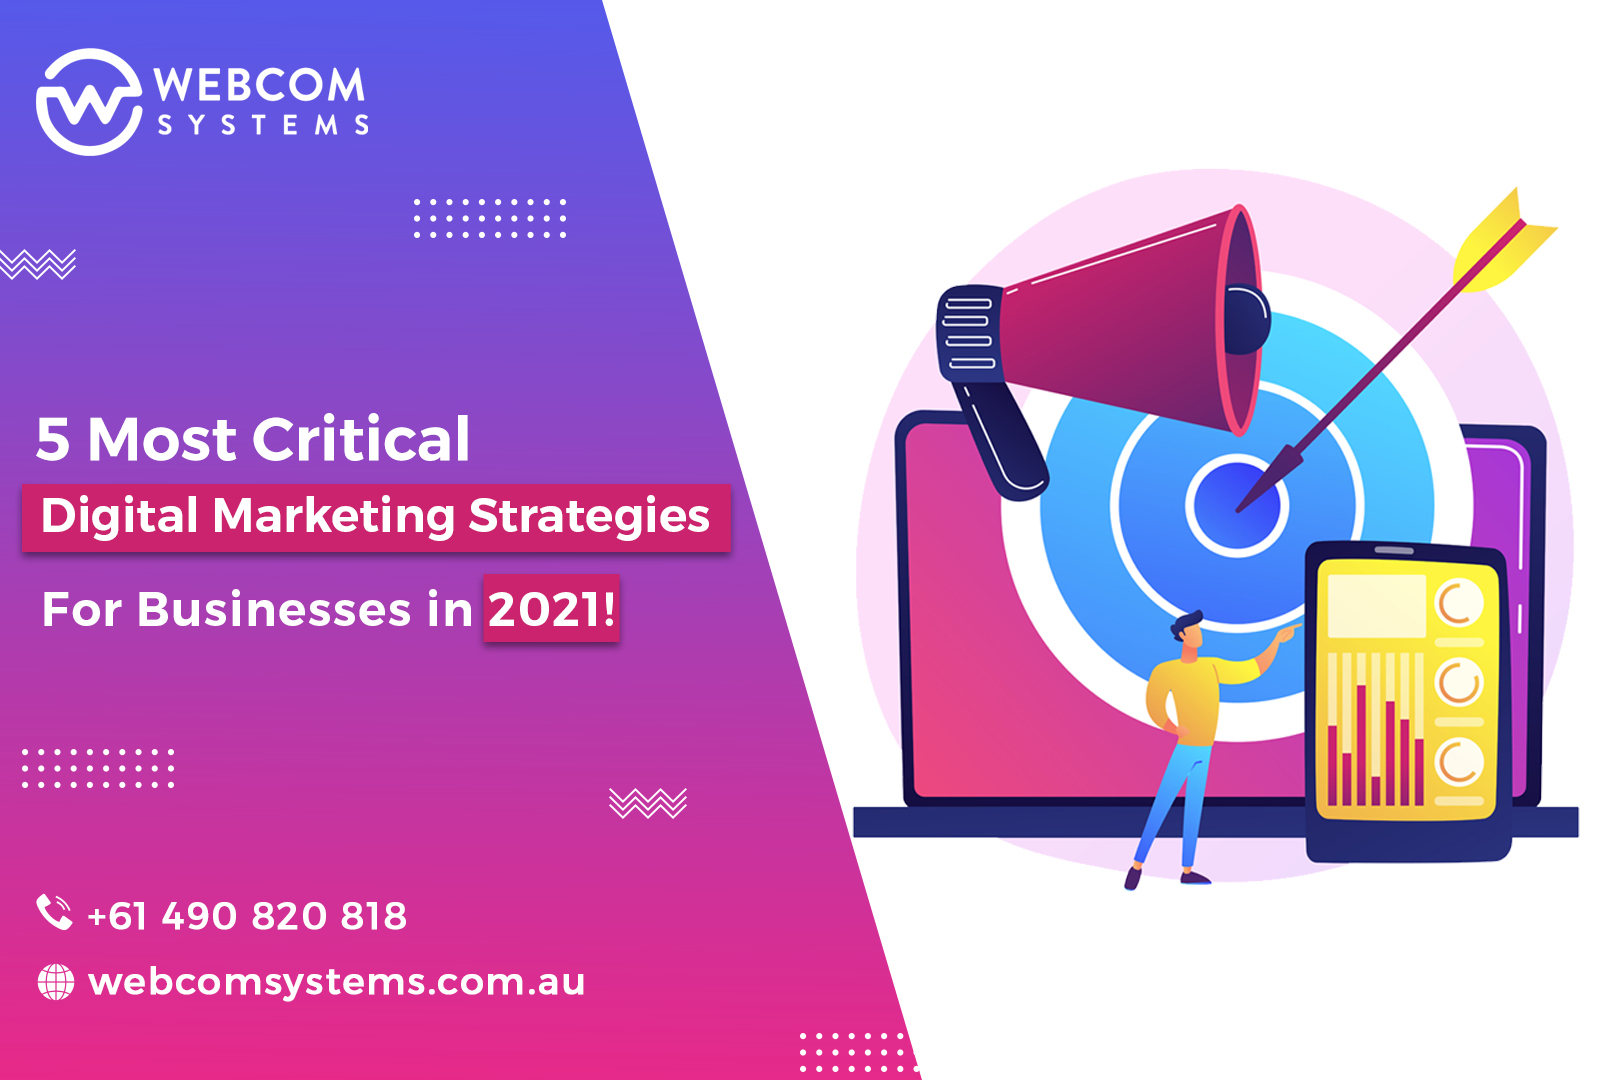 5 Most Critical Digital Marketing Strategies For Businesses in 2021